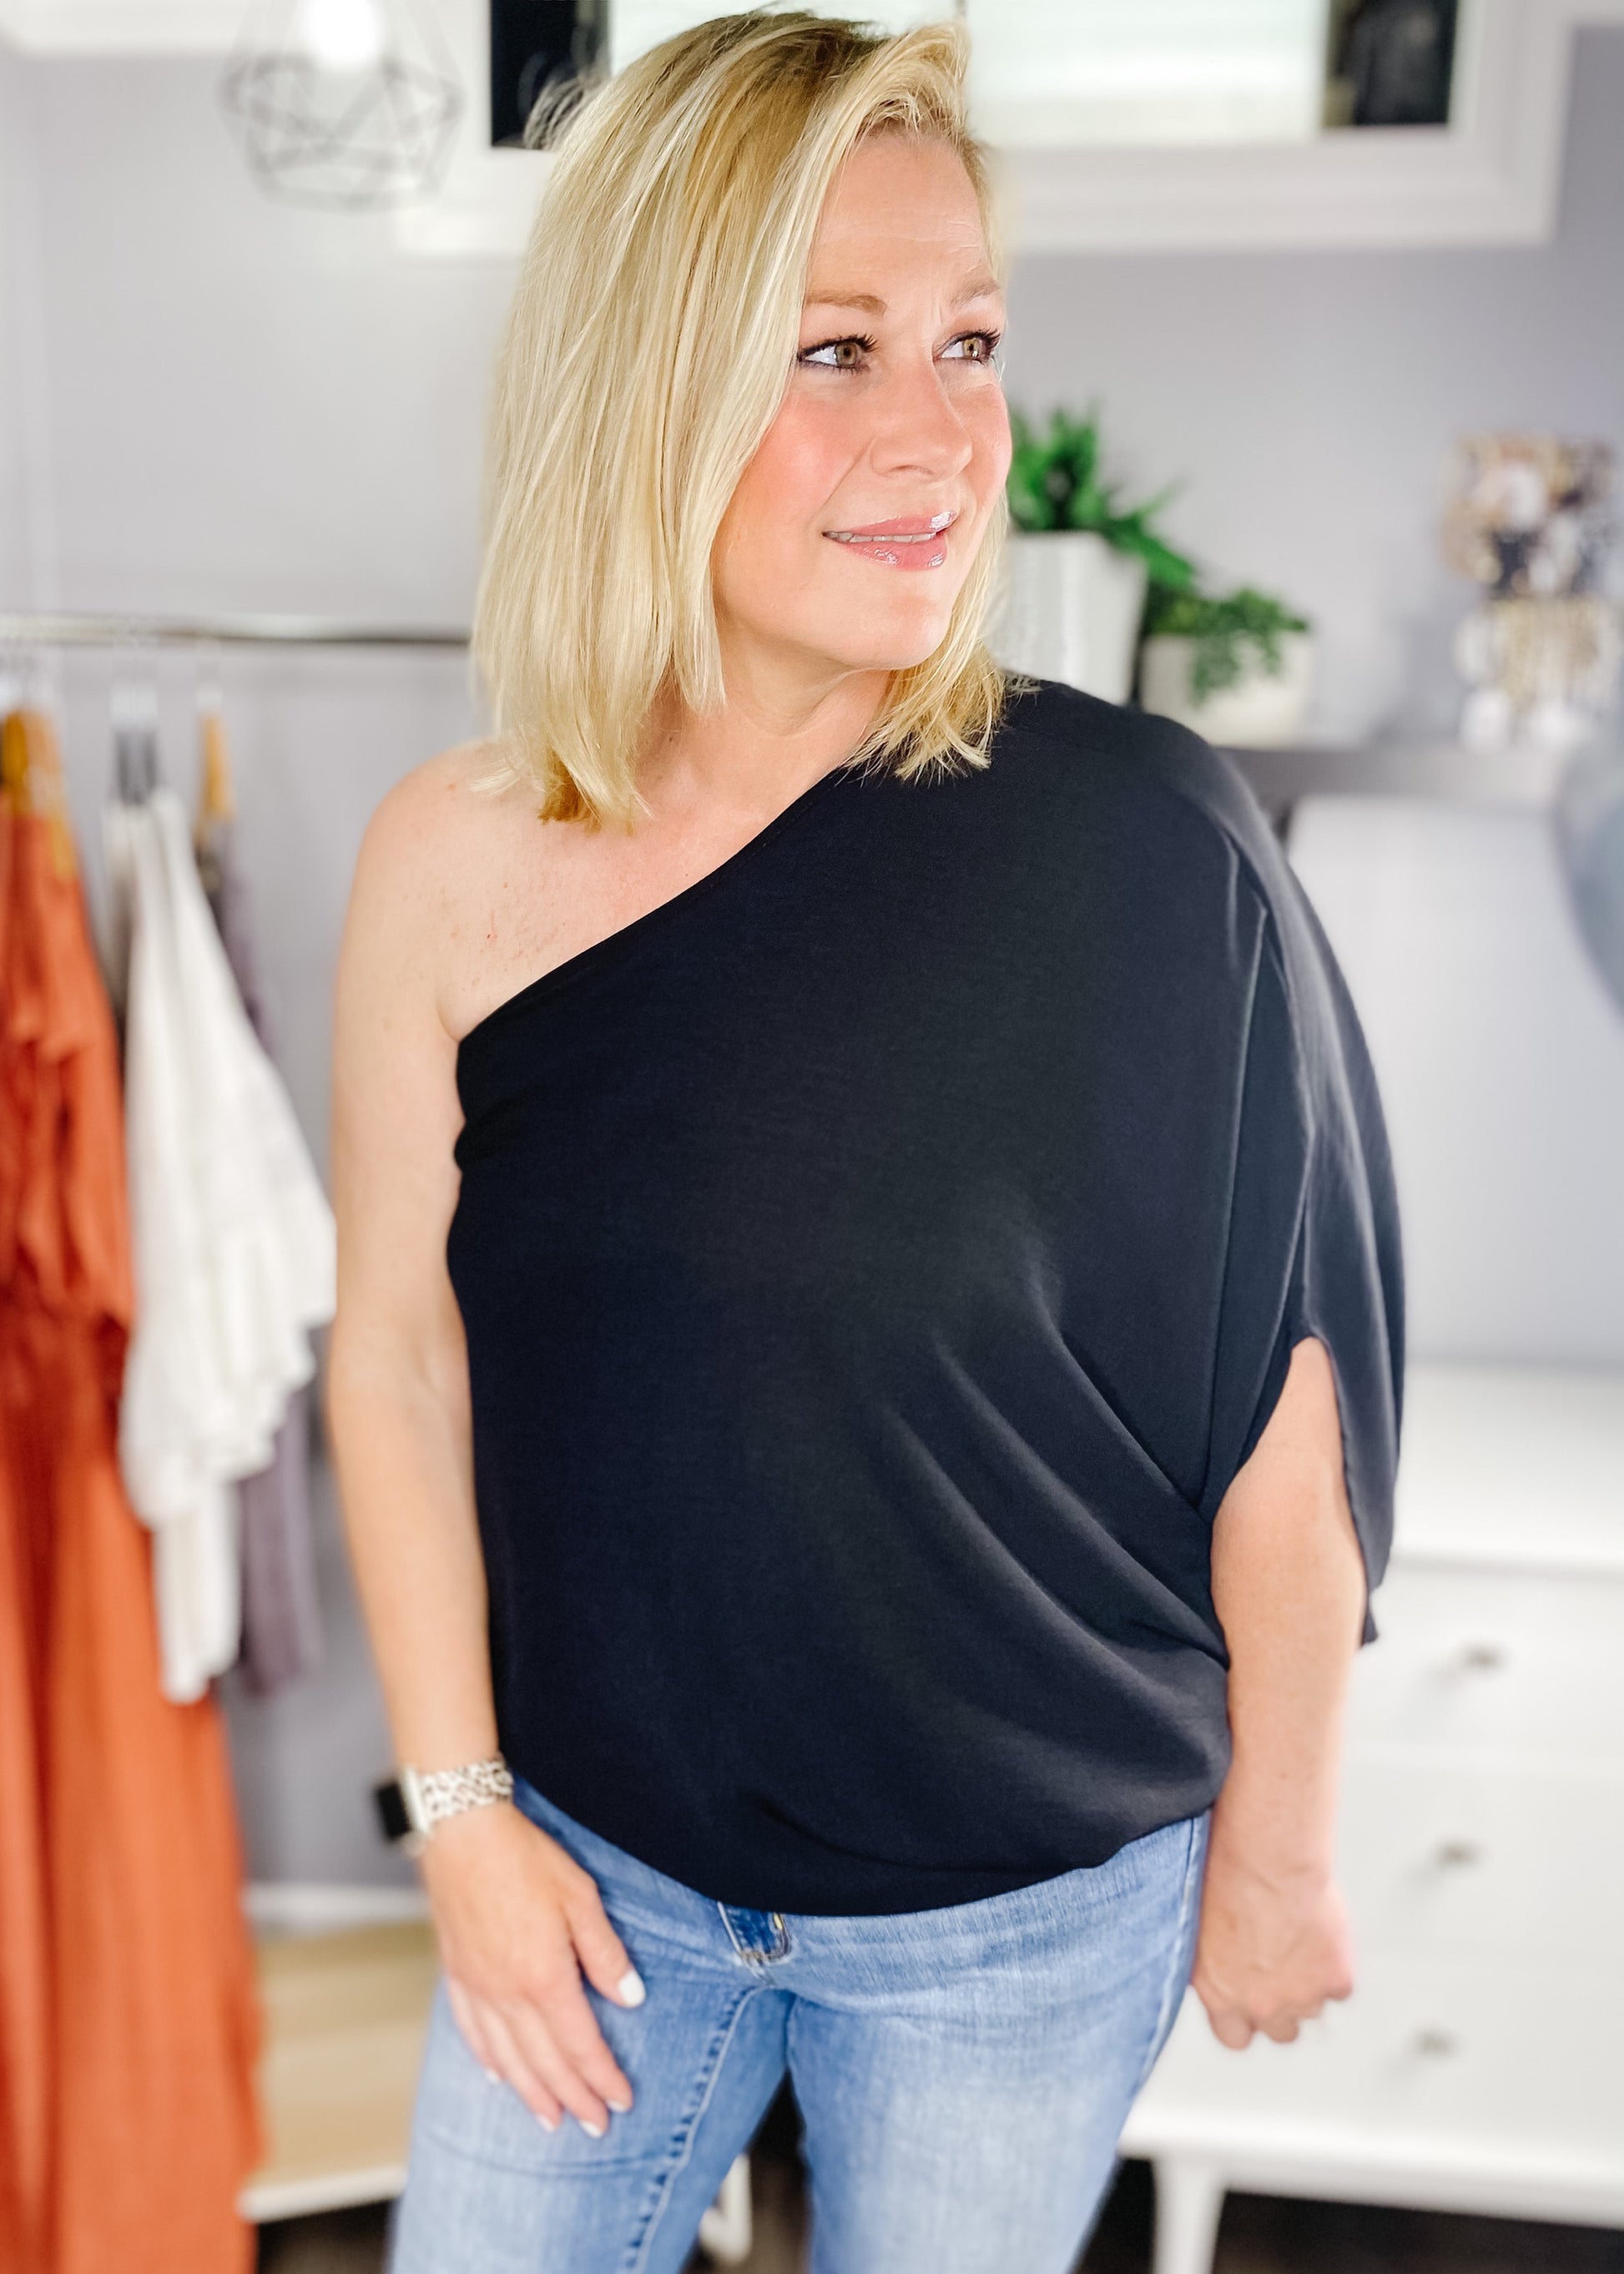 Stunning one shoulder top in black. Top features a one should with dolman sleeve to elbow, light flowy fabric in all black.  Available in small, medium and large.